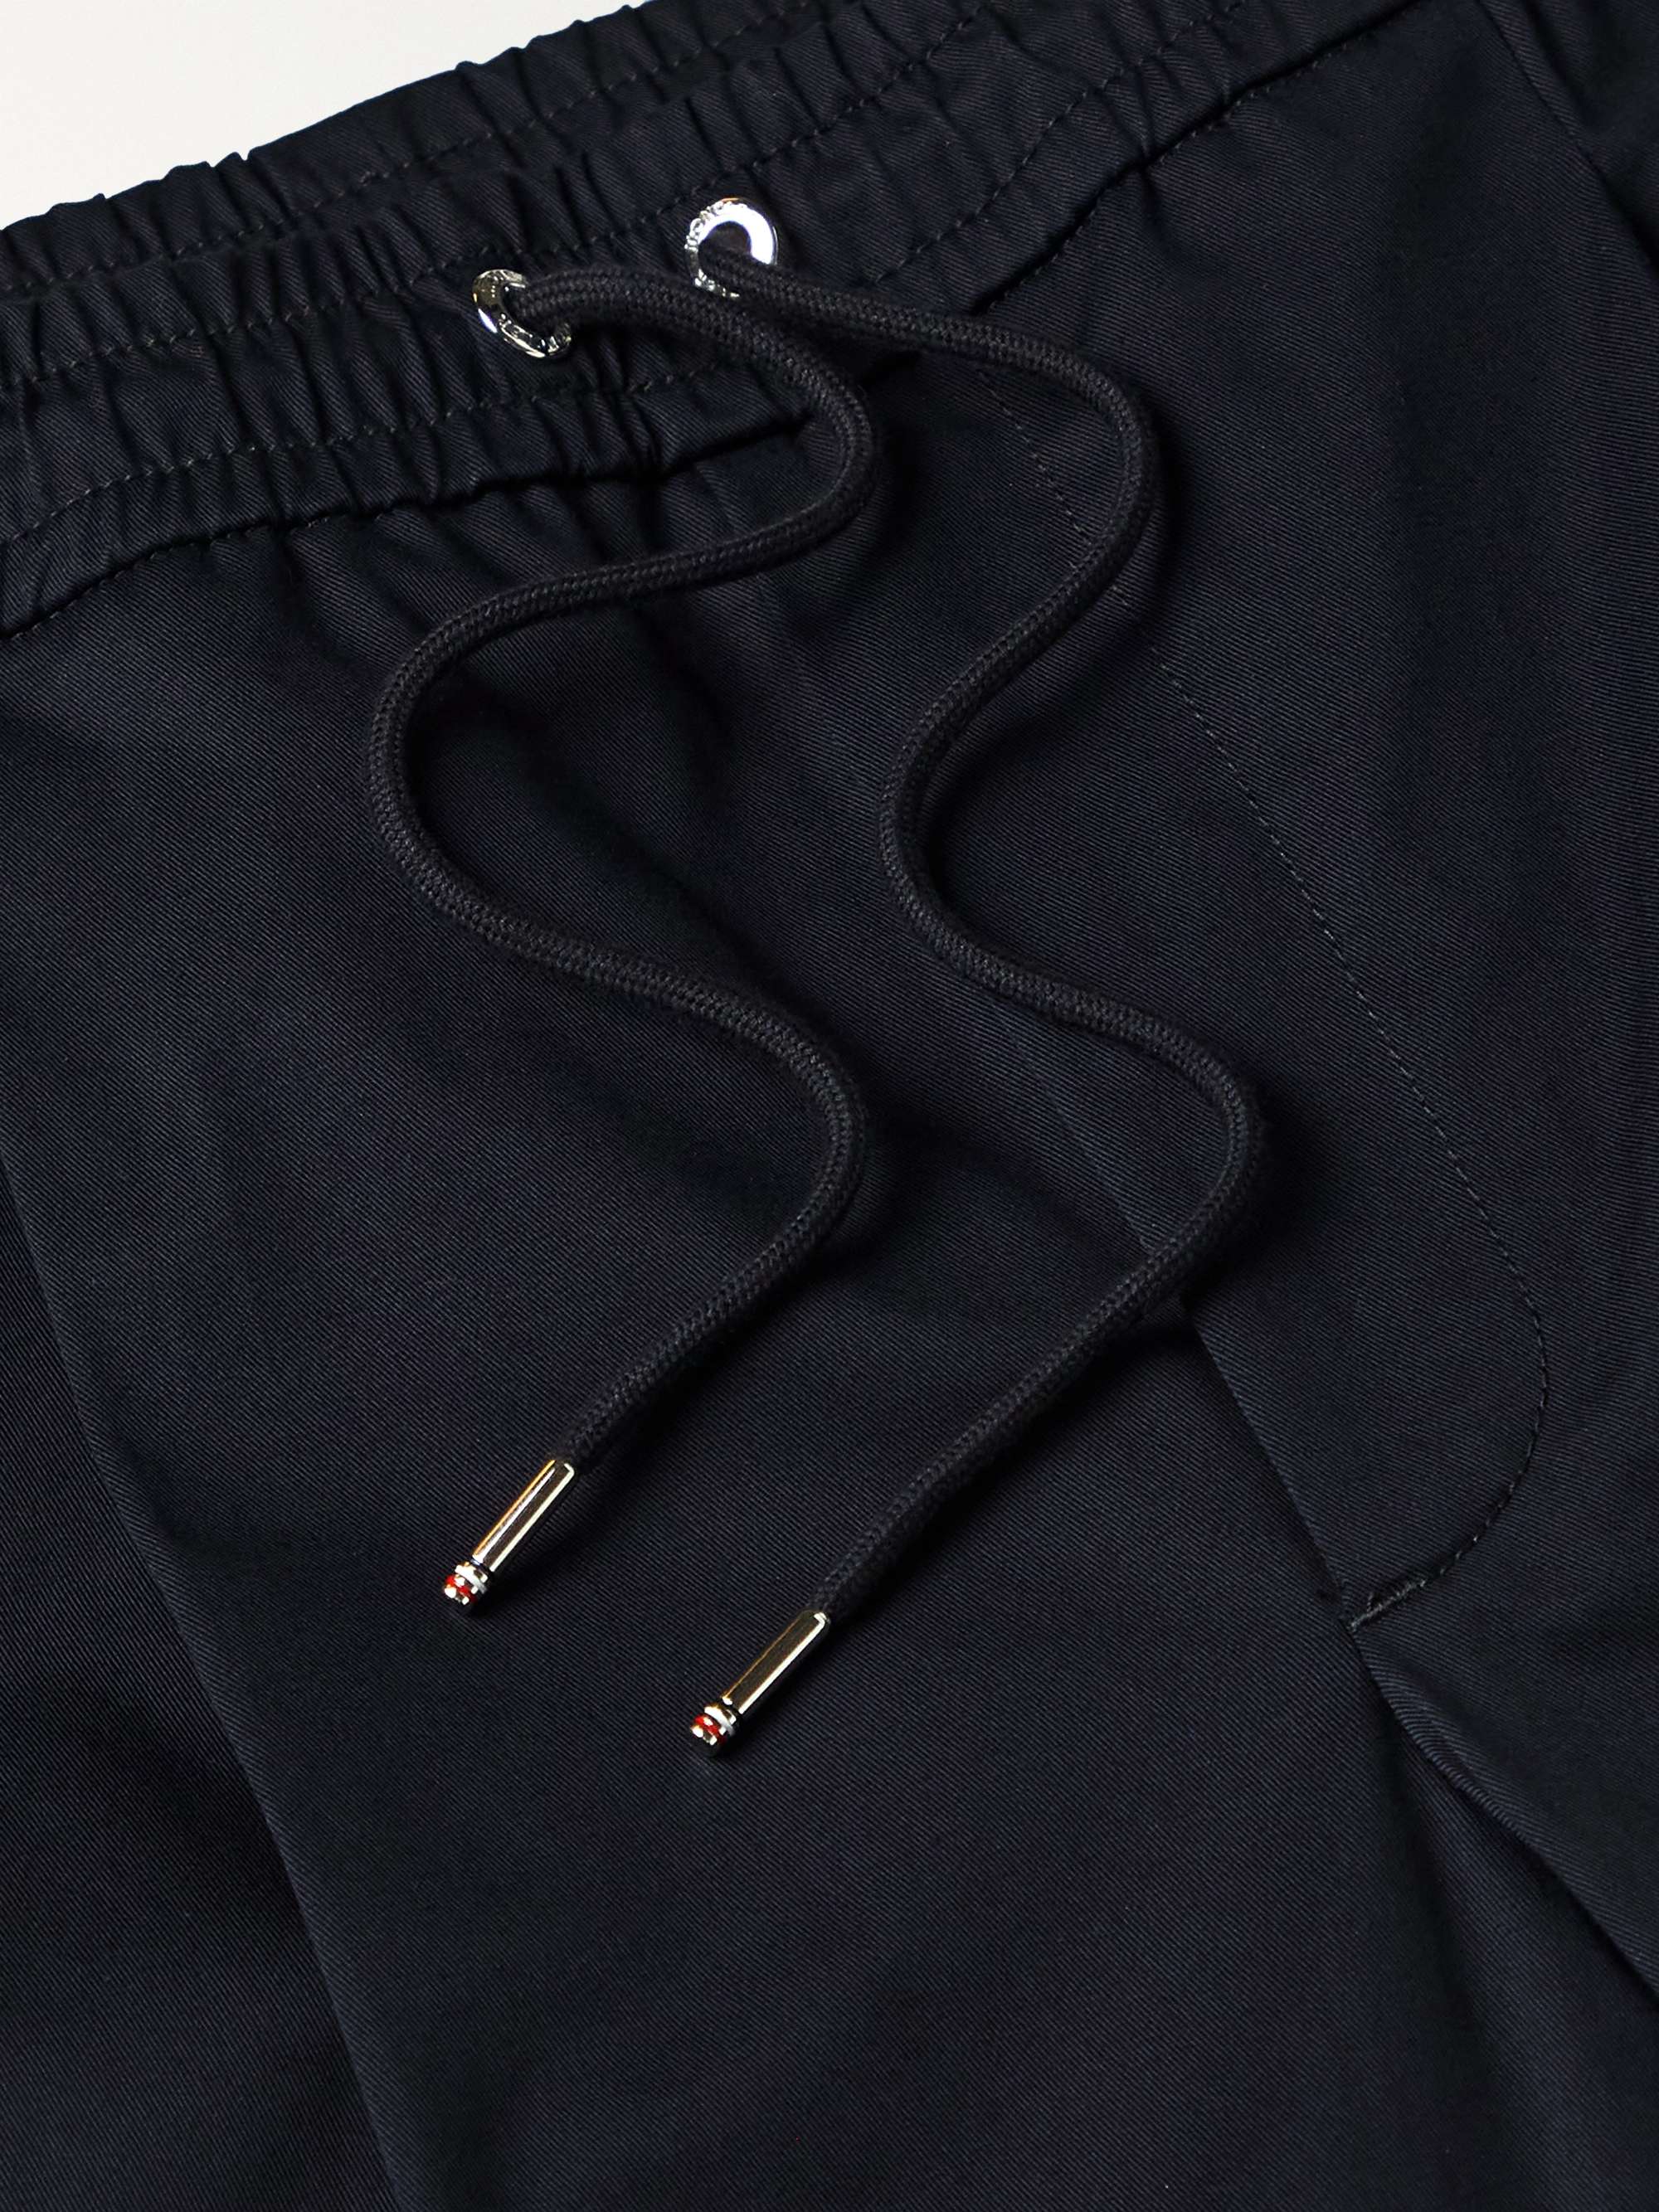 MONCLER Tapered Grosgrain-Trimmed Stretch-Cotton Twill Trousers